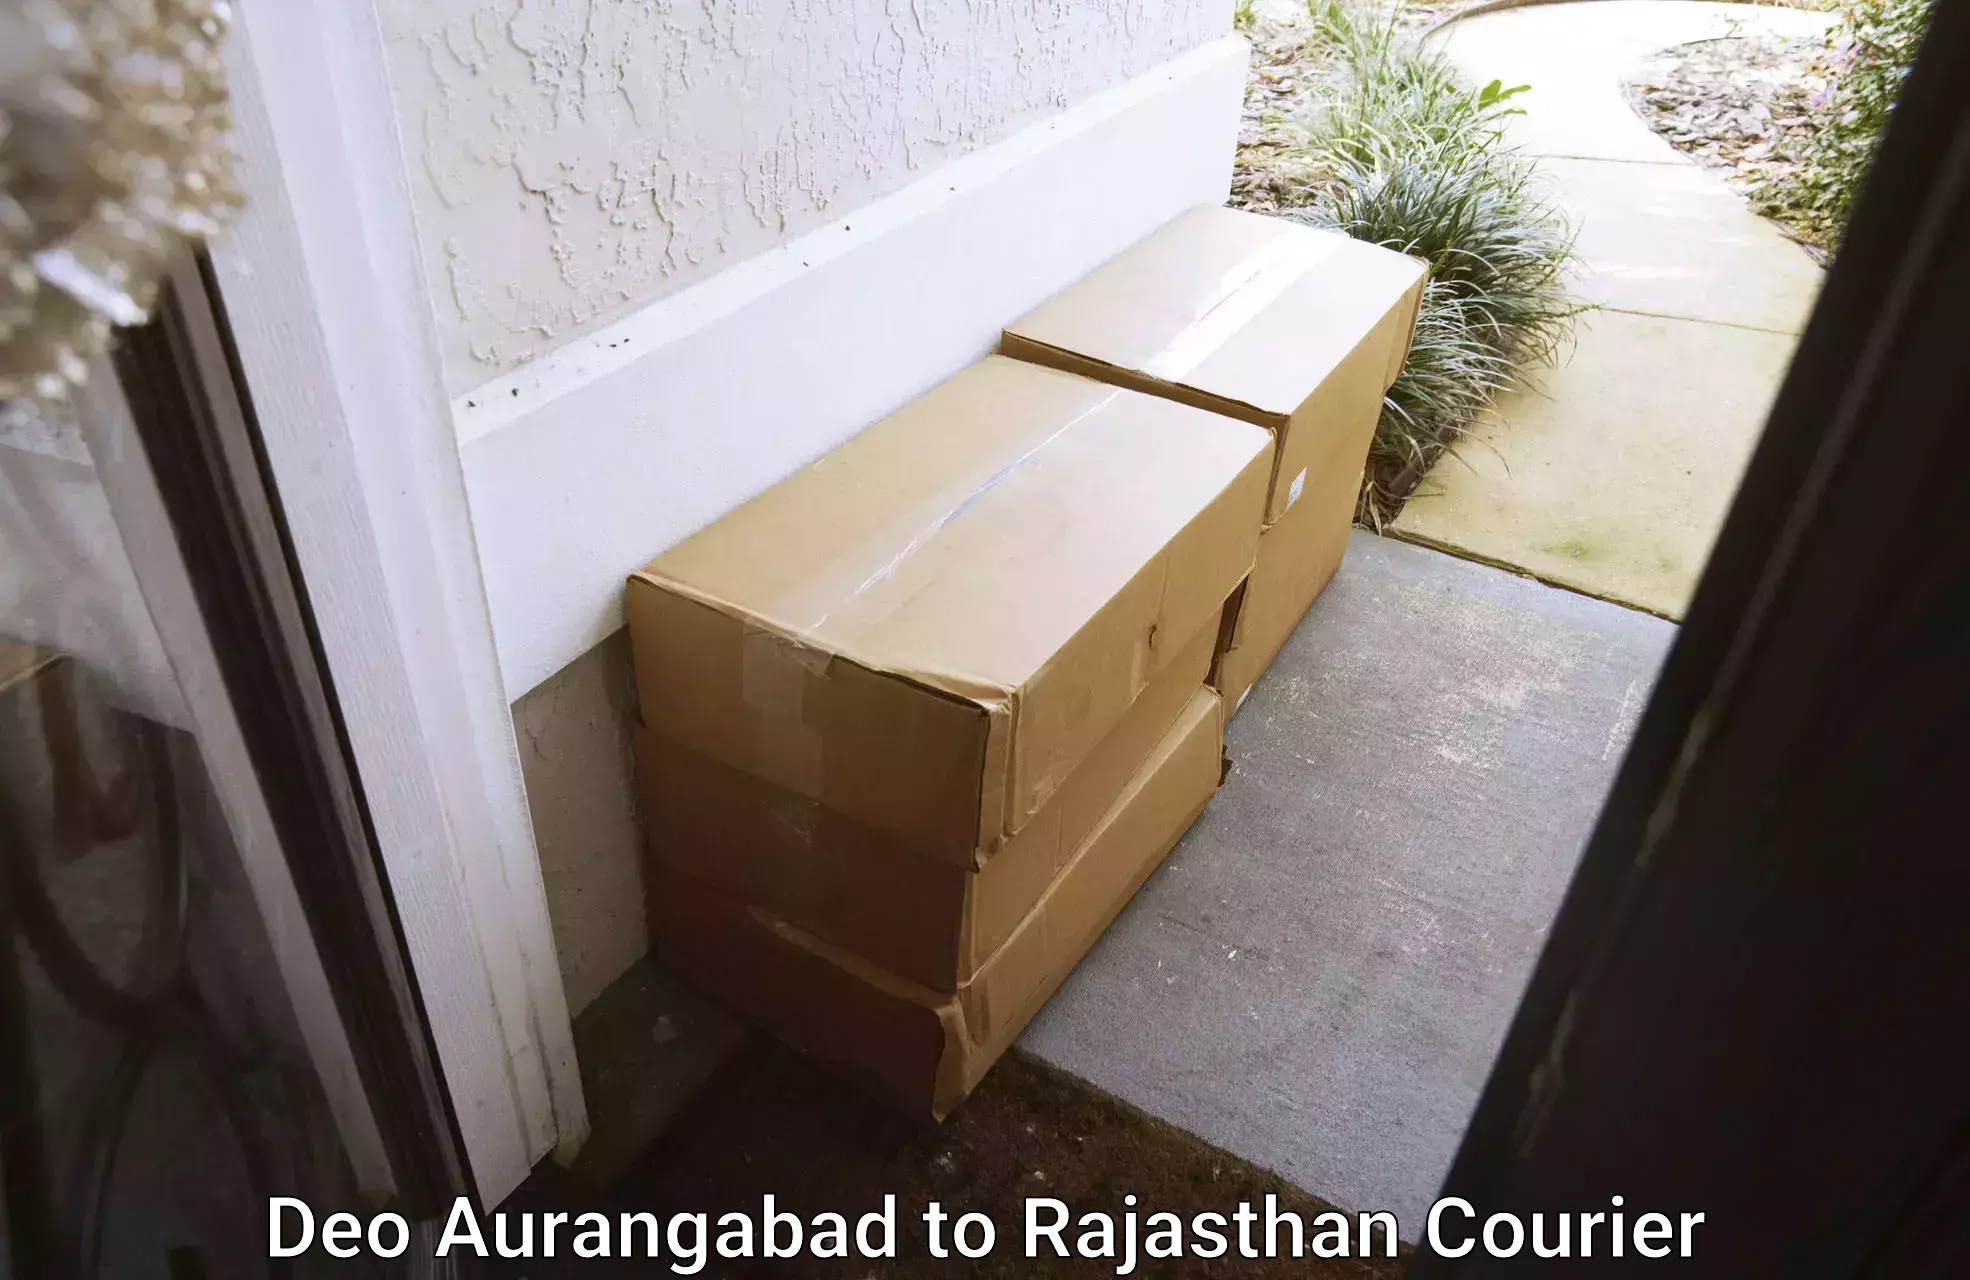 Professional moving assistance Deo Aurangabad to Rajasthan